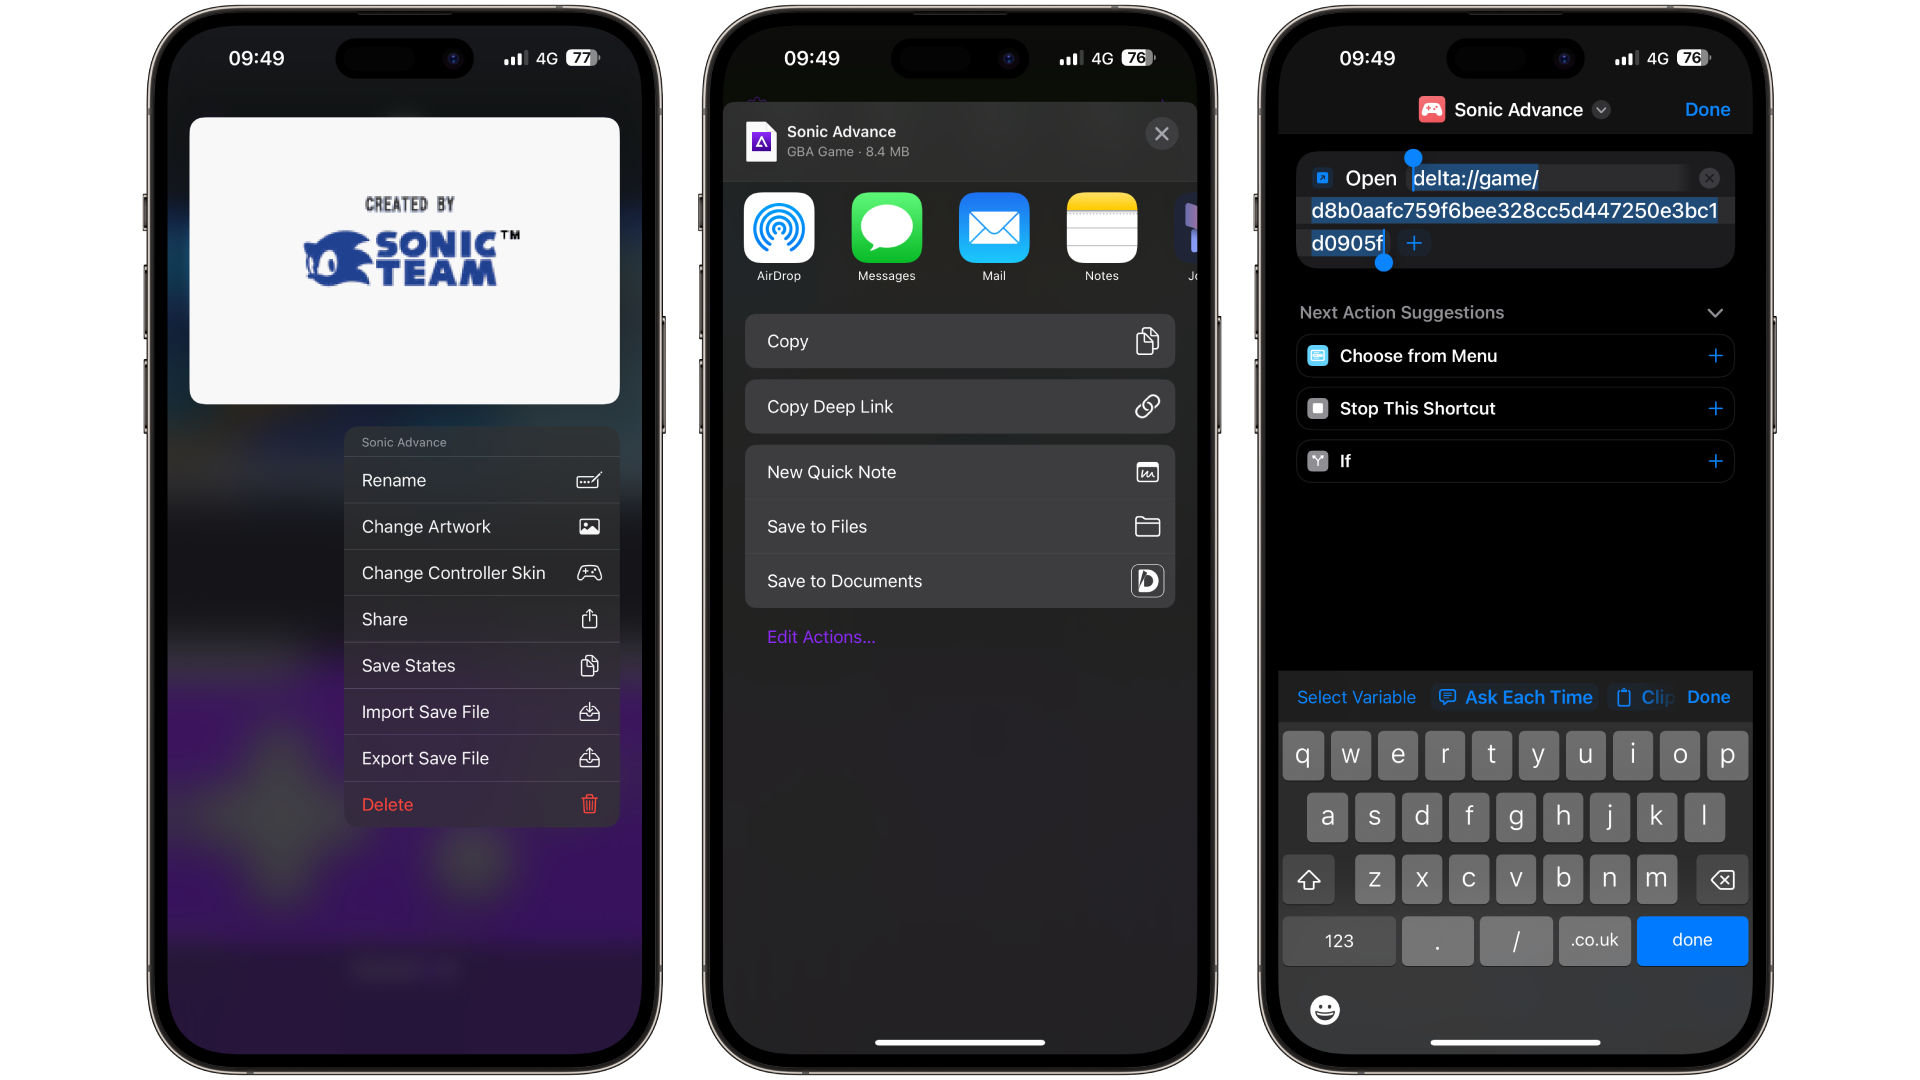 Delta Emulator and Shortcuts app on iPhone